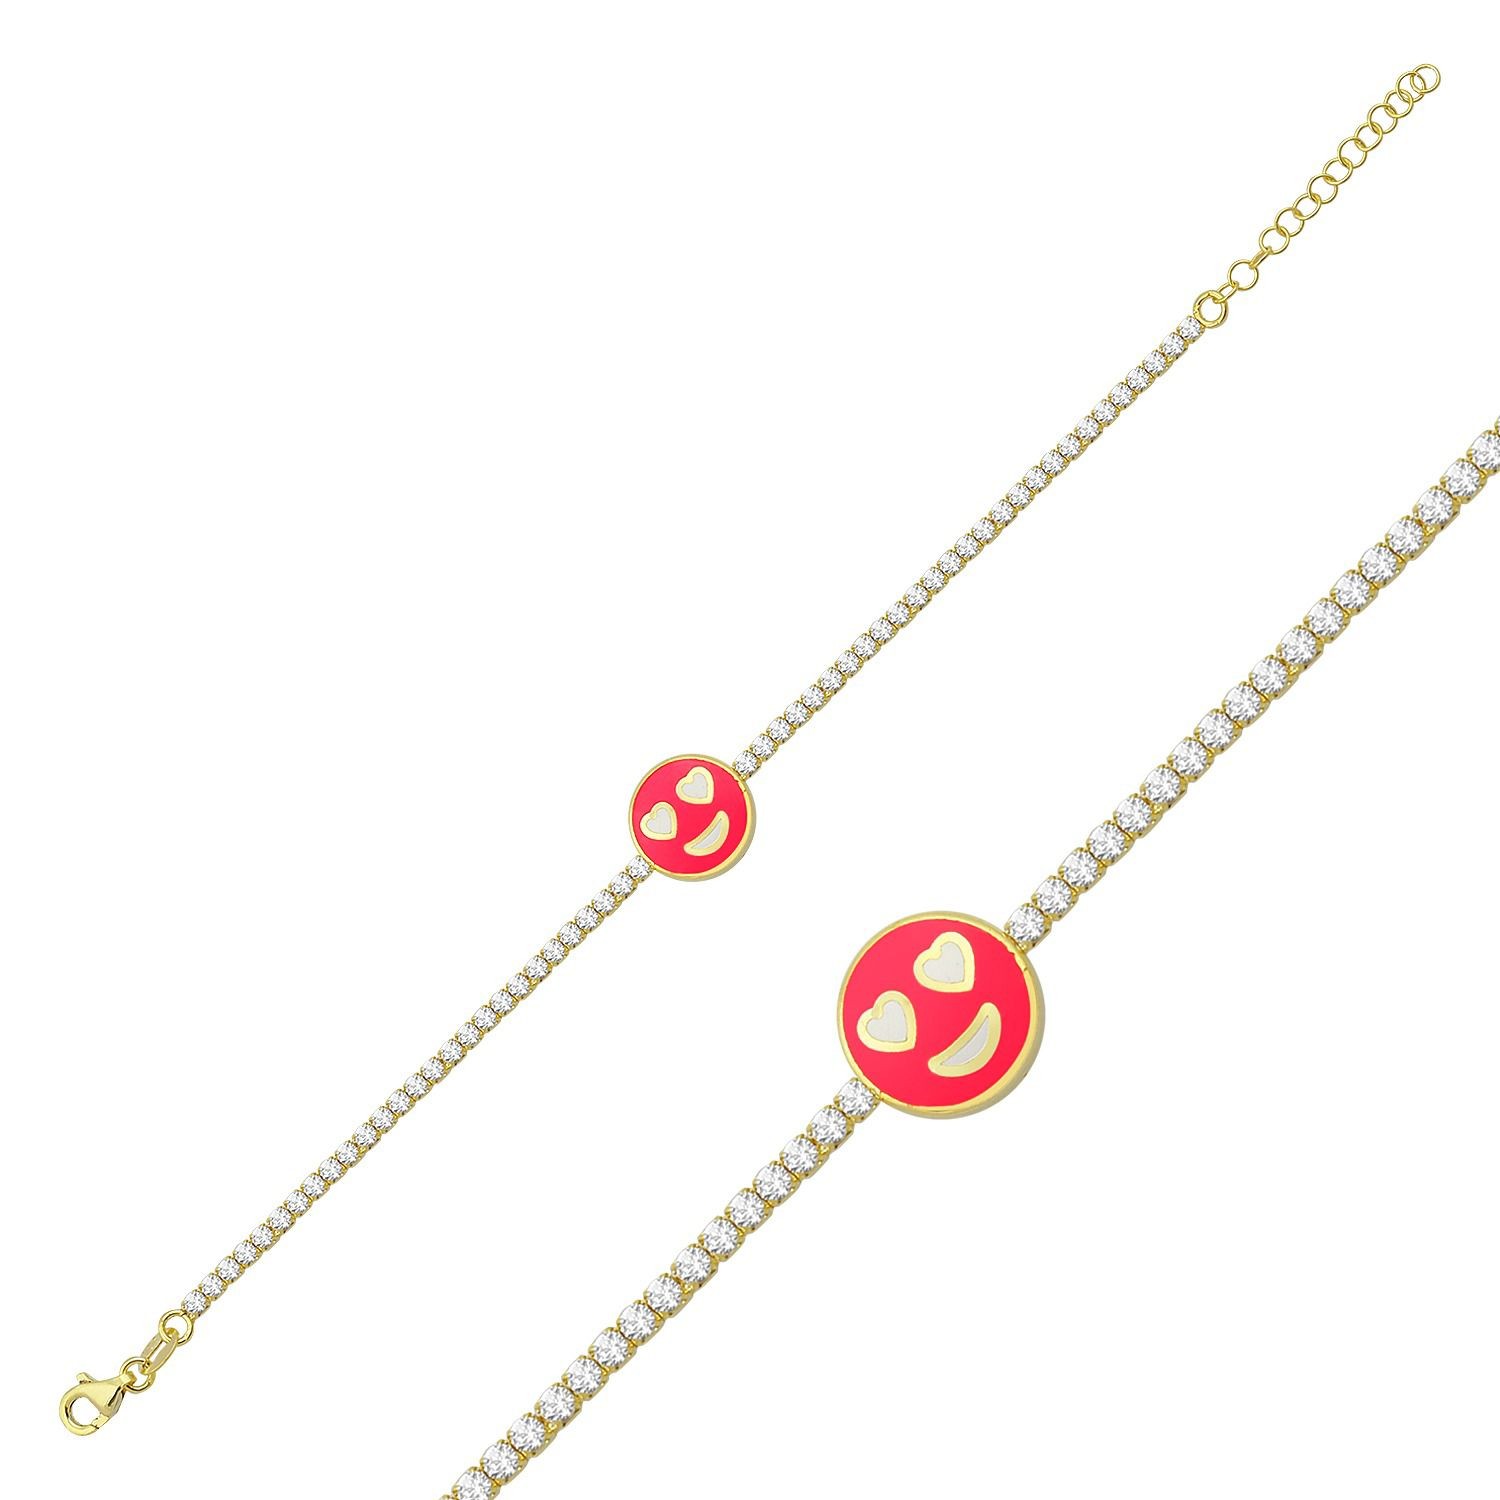 Sterling Silver Yellow Gold Plated Love Heart Smiley Face Tennis Bracelet With Hot Pink Enamel & Cubic Zirconia